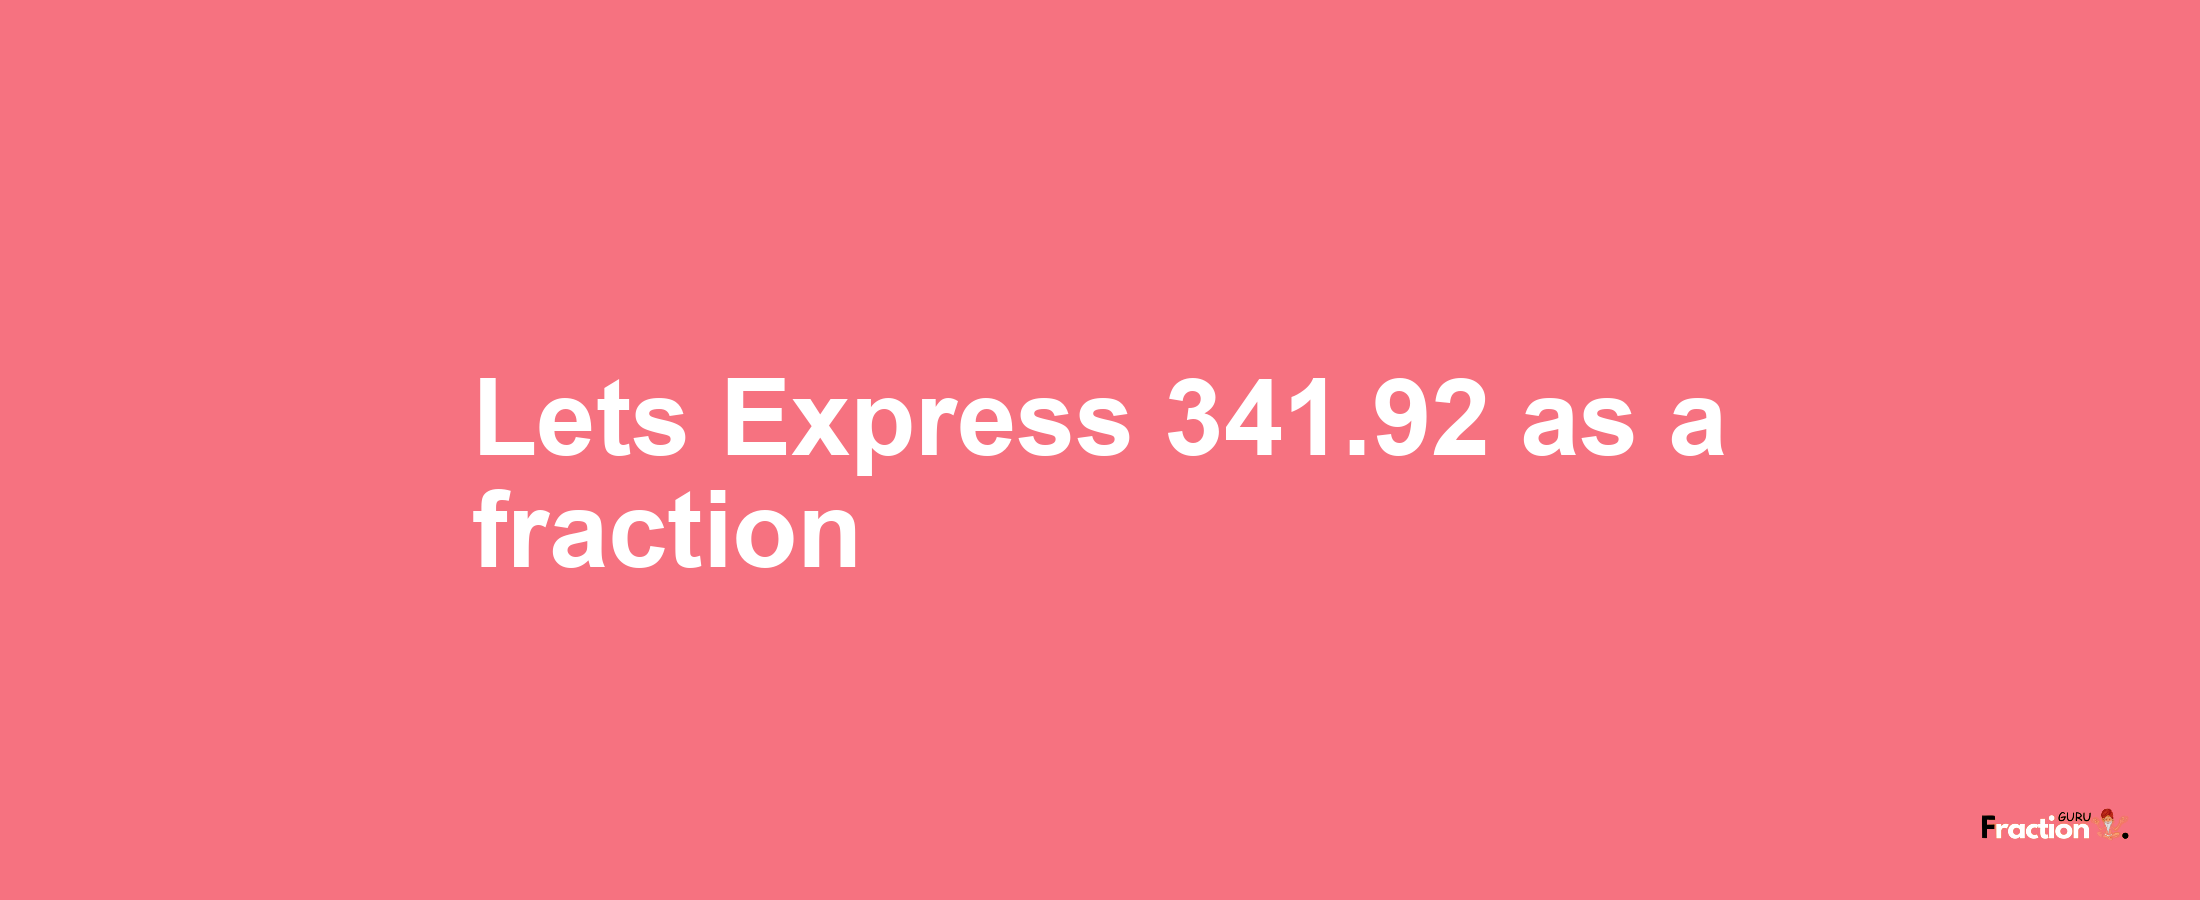 Lets Express 341.92 as afraction